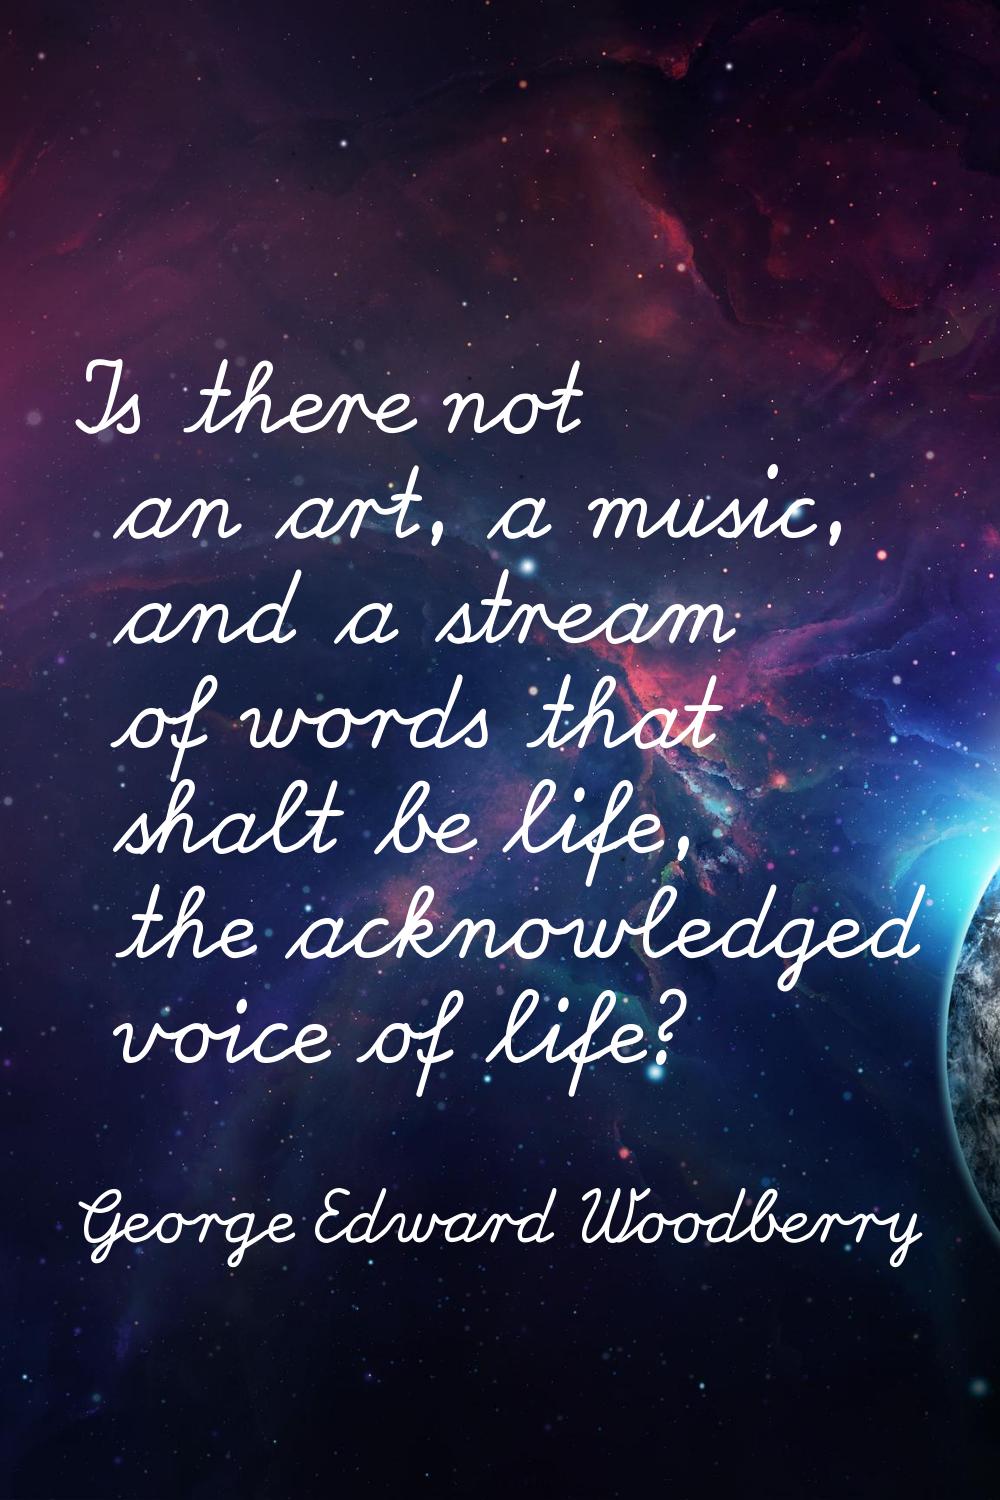 Is there not an art, a music, and a stream of words that shalt be life, the acknowledged voice of l